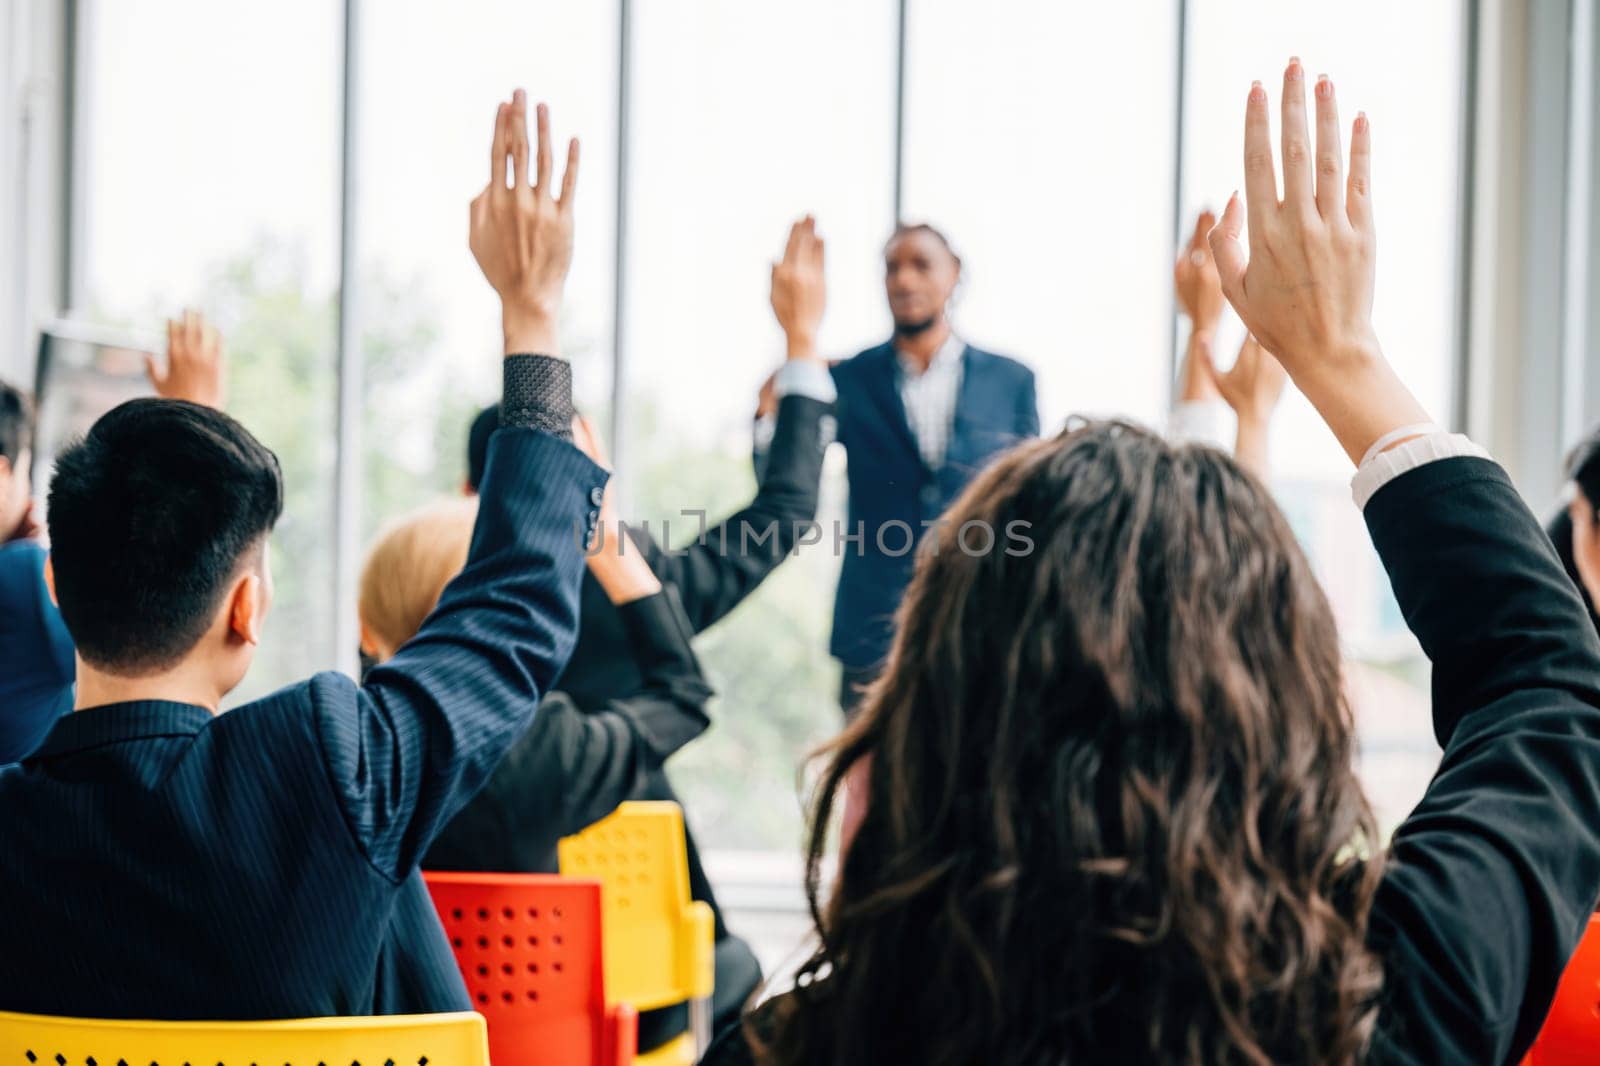 At a corporate event businesspeople engage in a conference and convention. Hands are raised symbolizing questions and active participation in a meeting and training seminar.